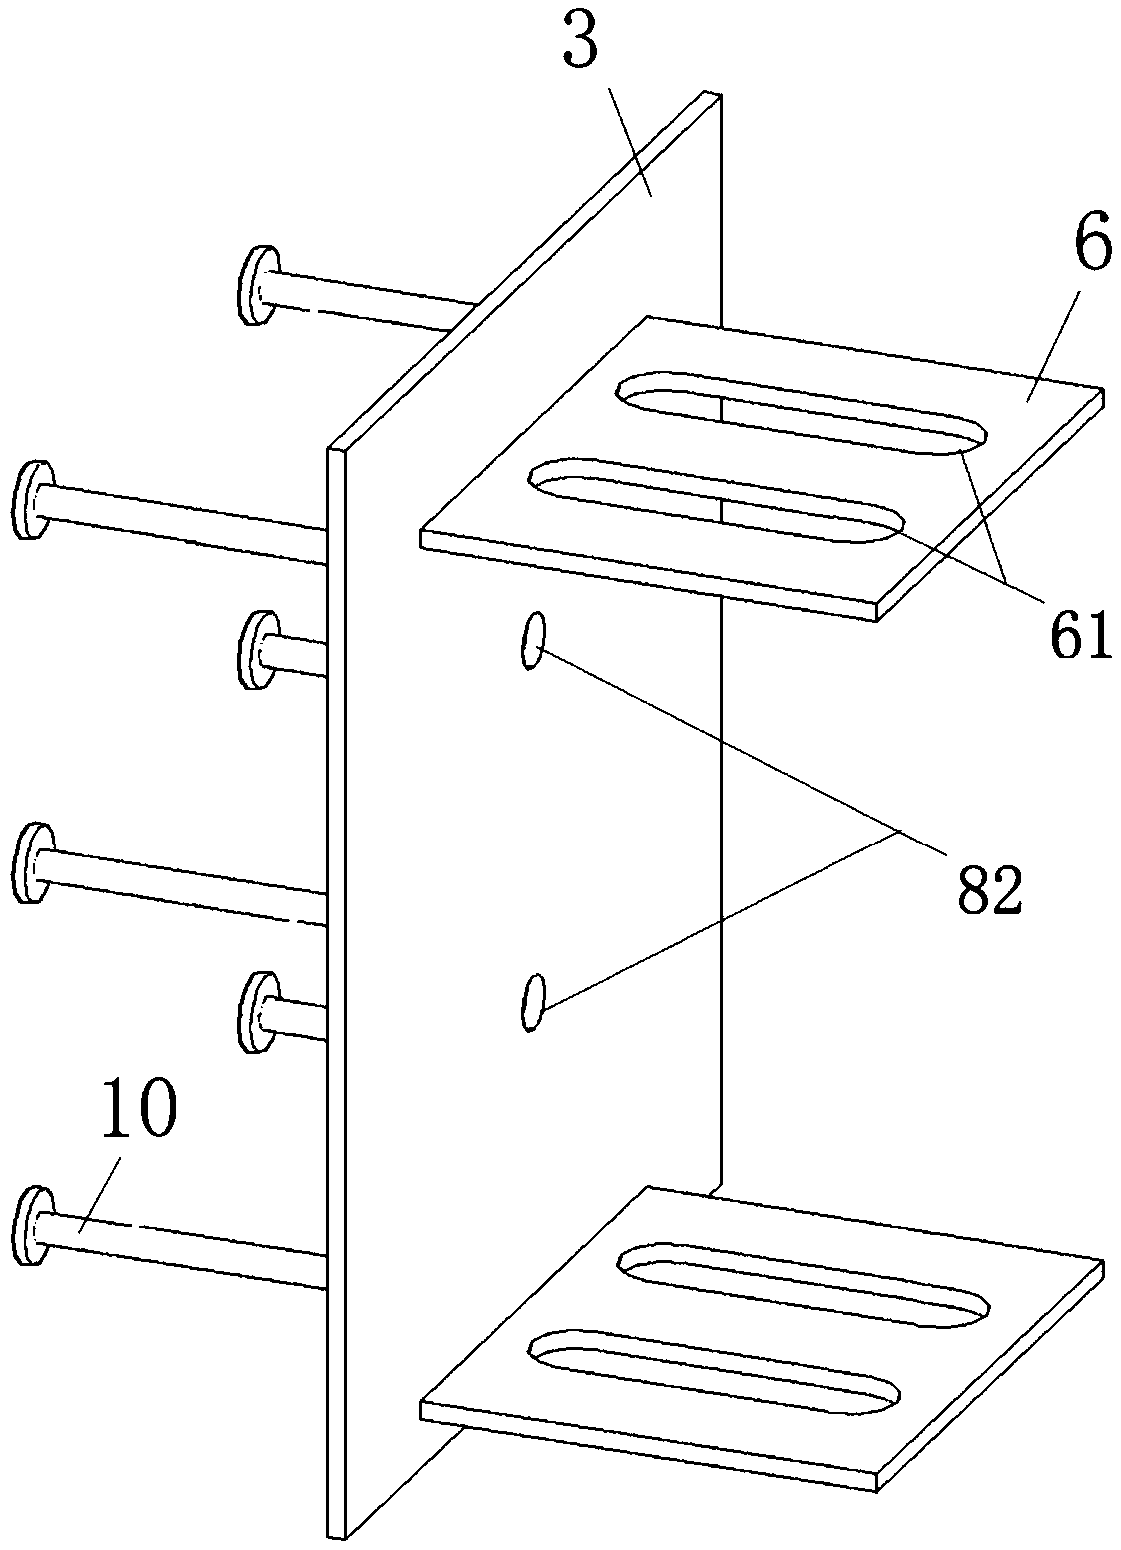 Fabricated self-resetting prestressed concrete frame friction energy dissipation node